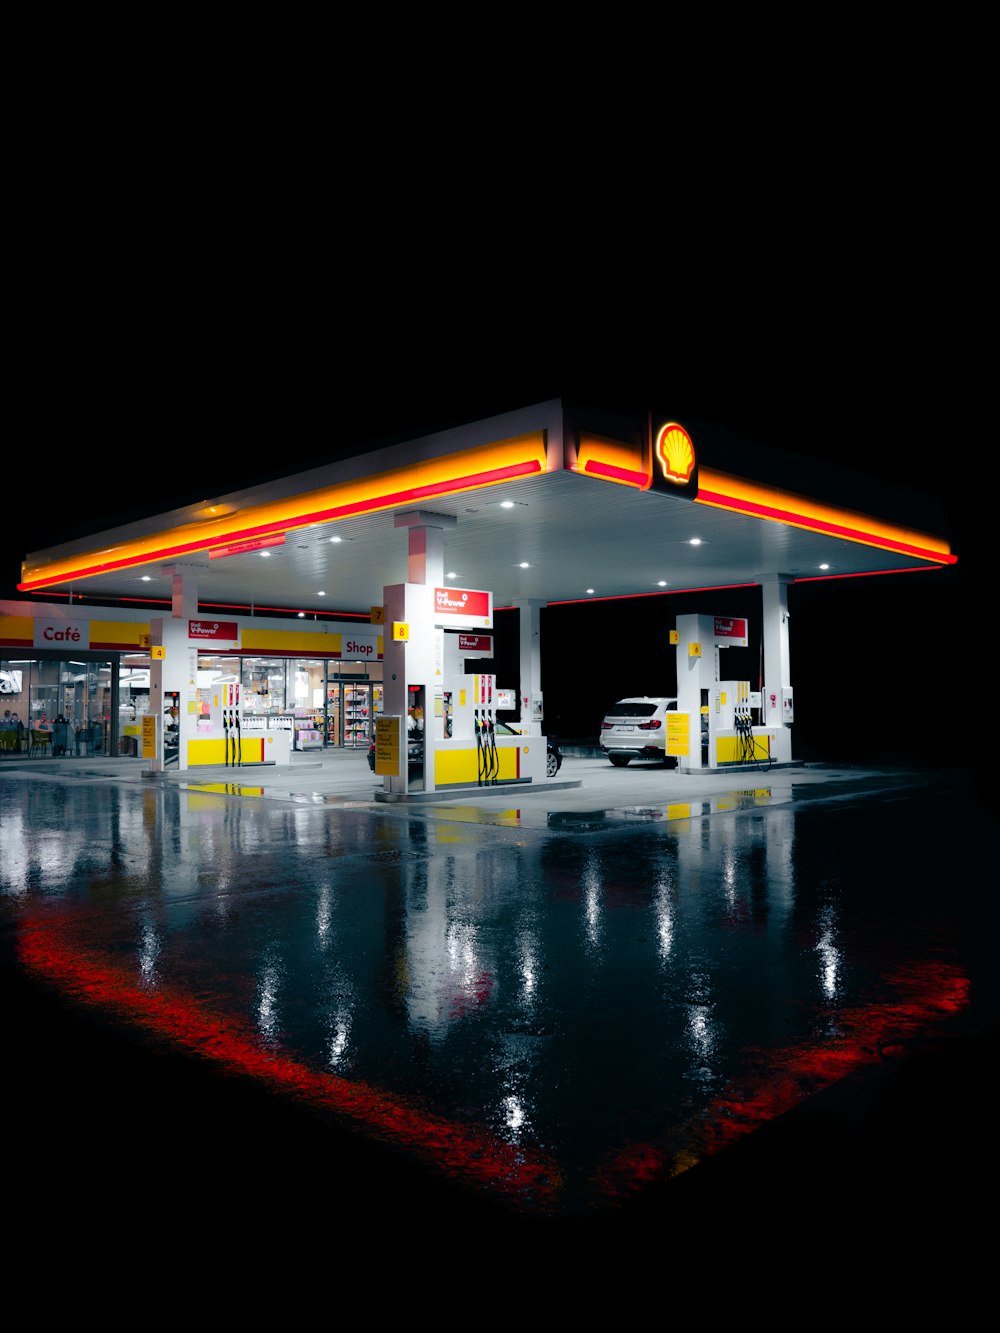 a gas station lit up at night time